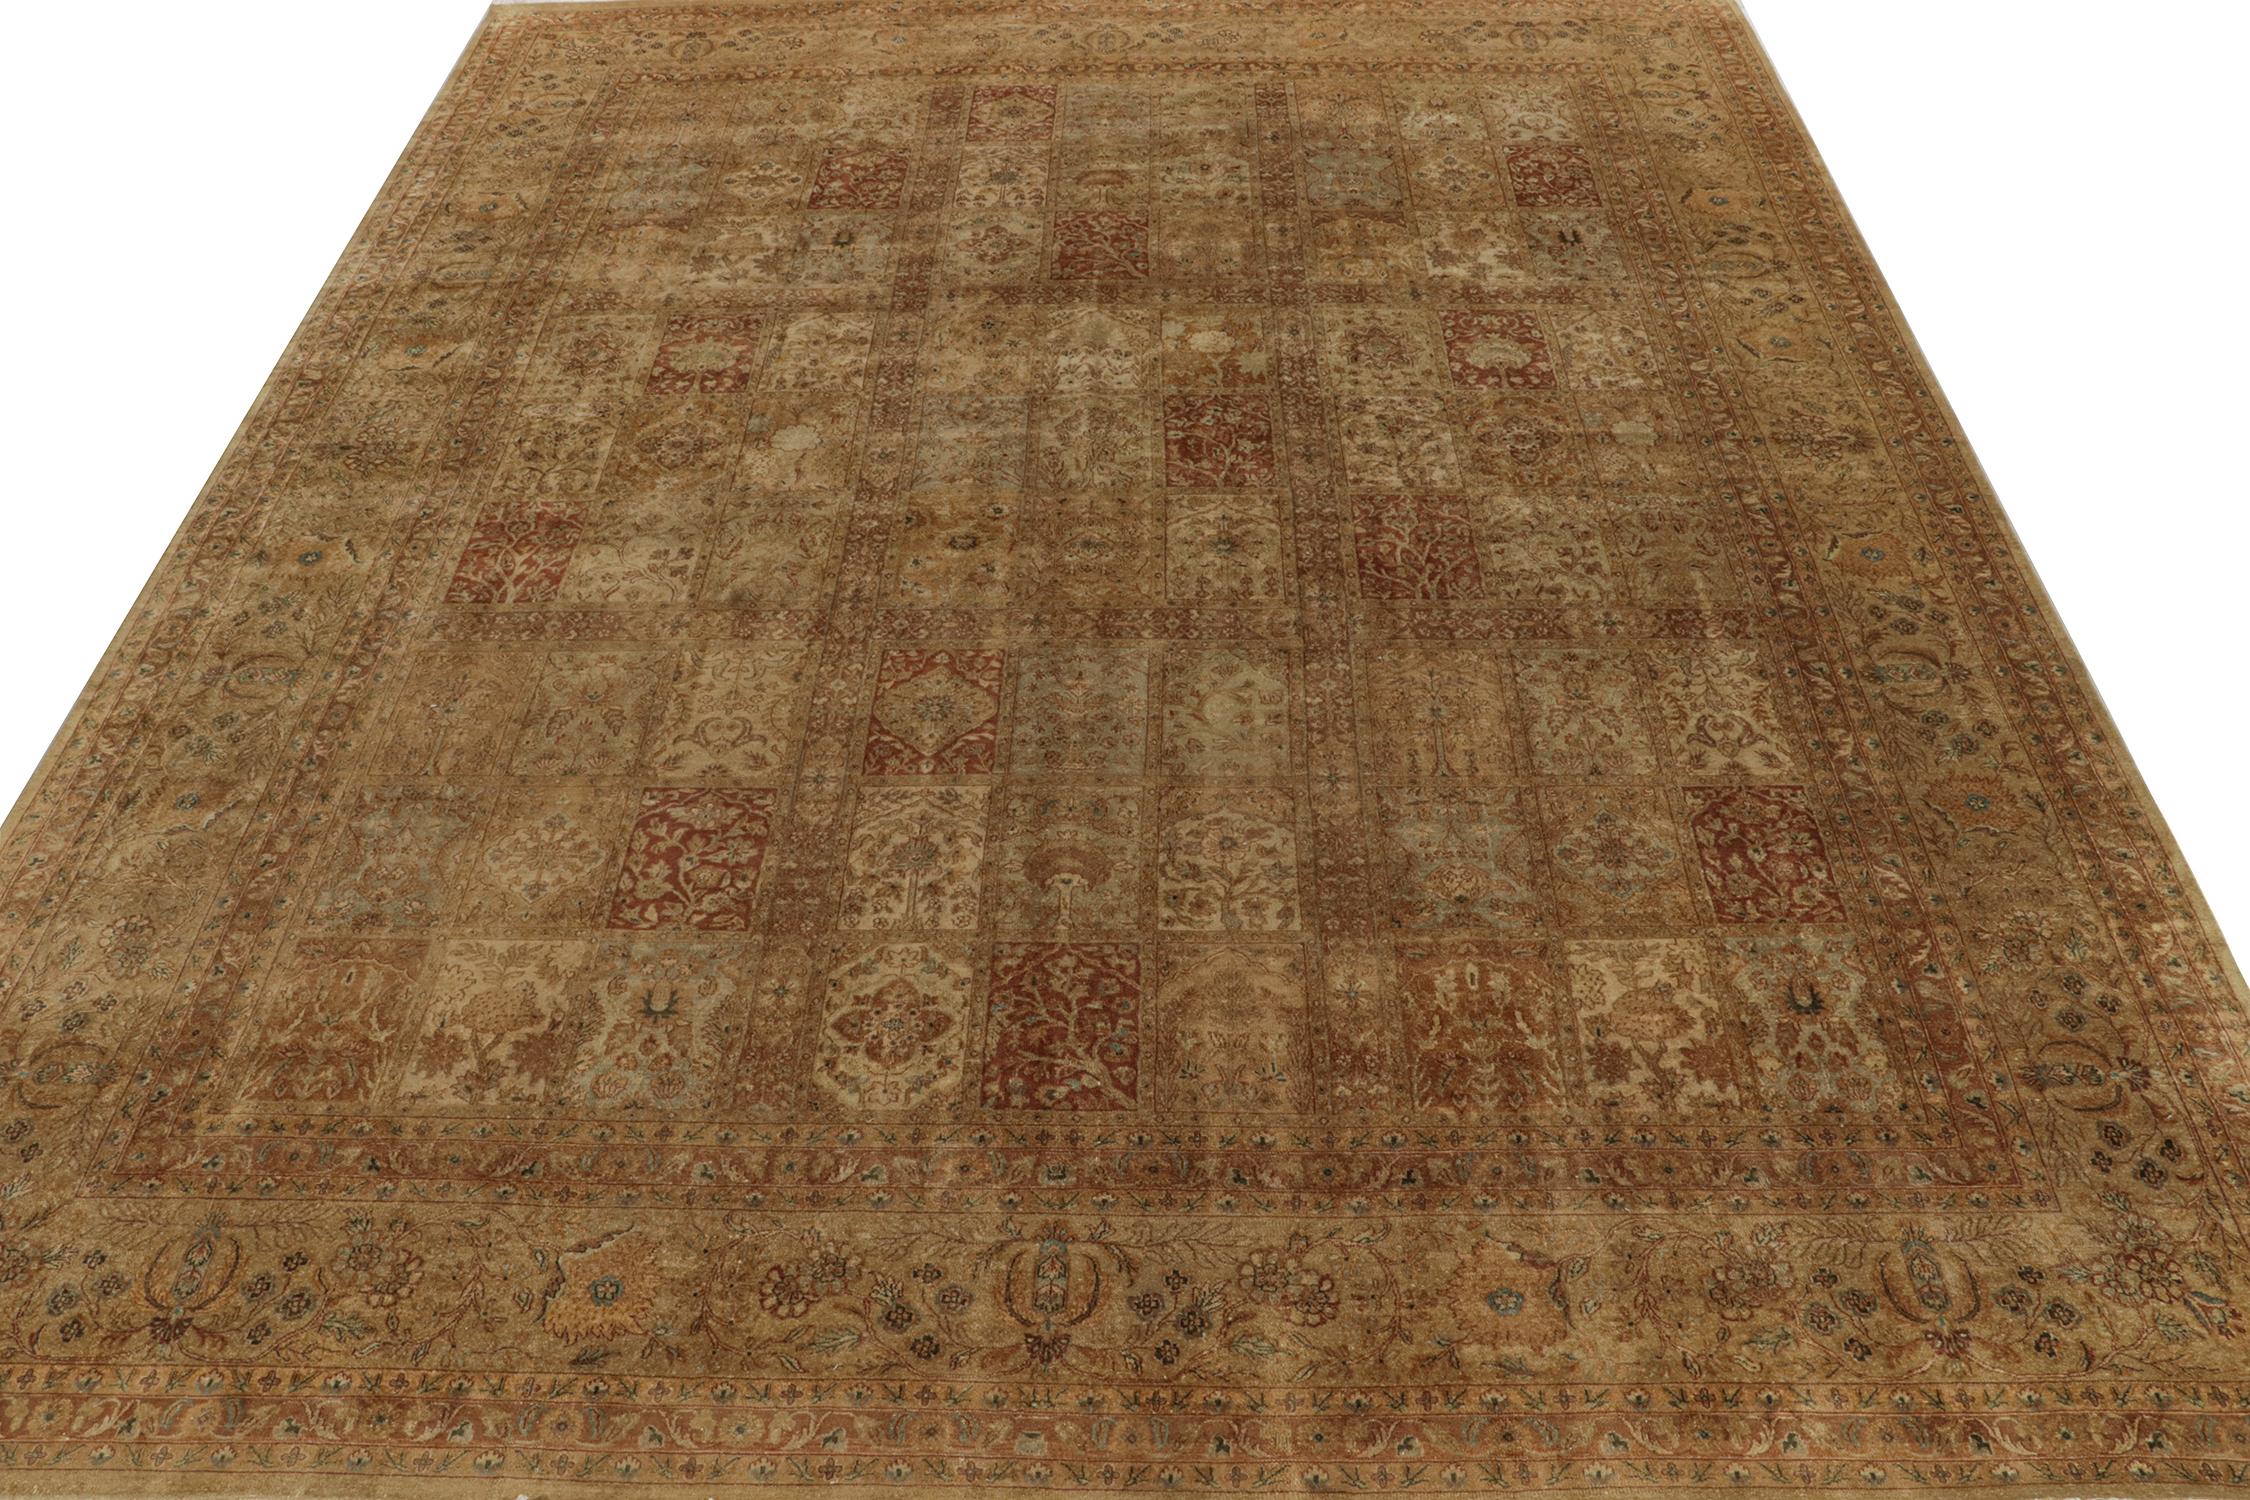 Indian Rug & Kilim’s Classic Persian Style Rug in Beige-Brown and Red Floral Patterns